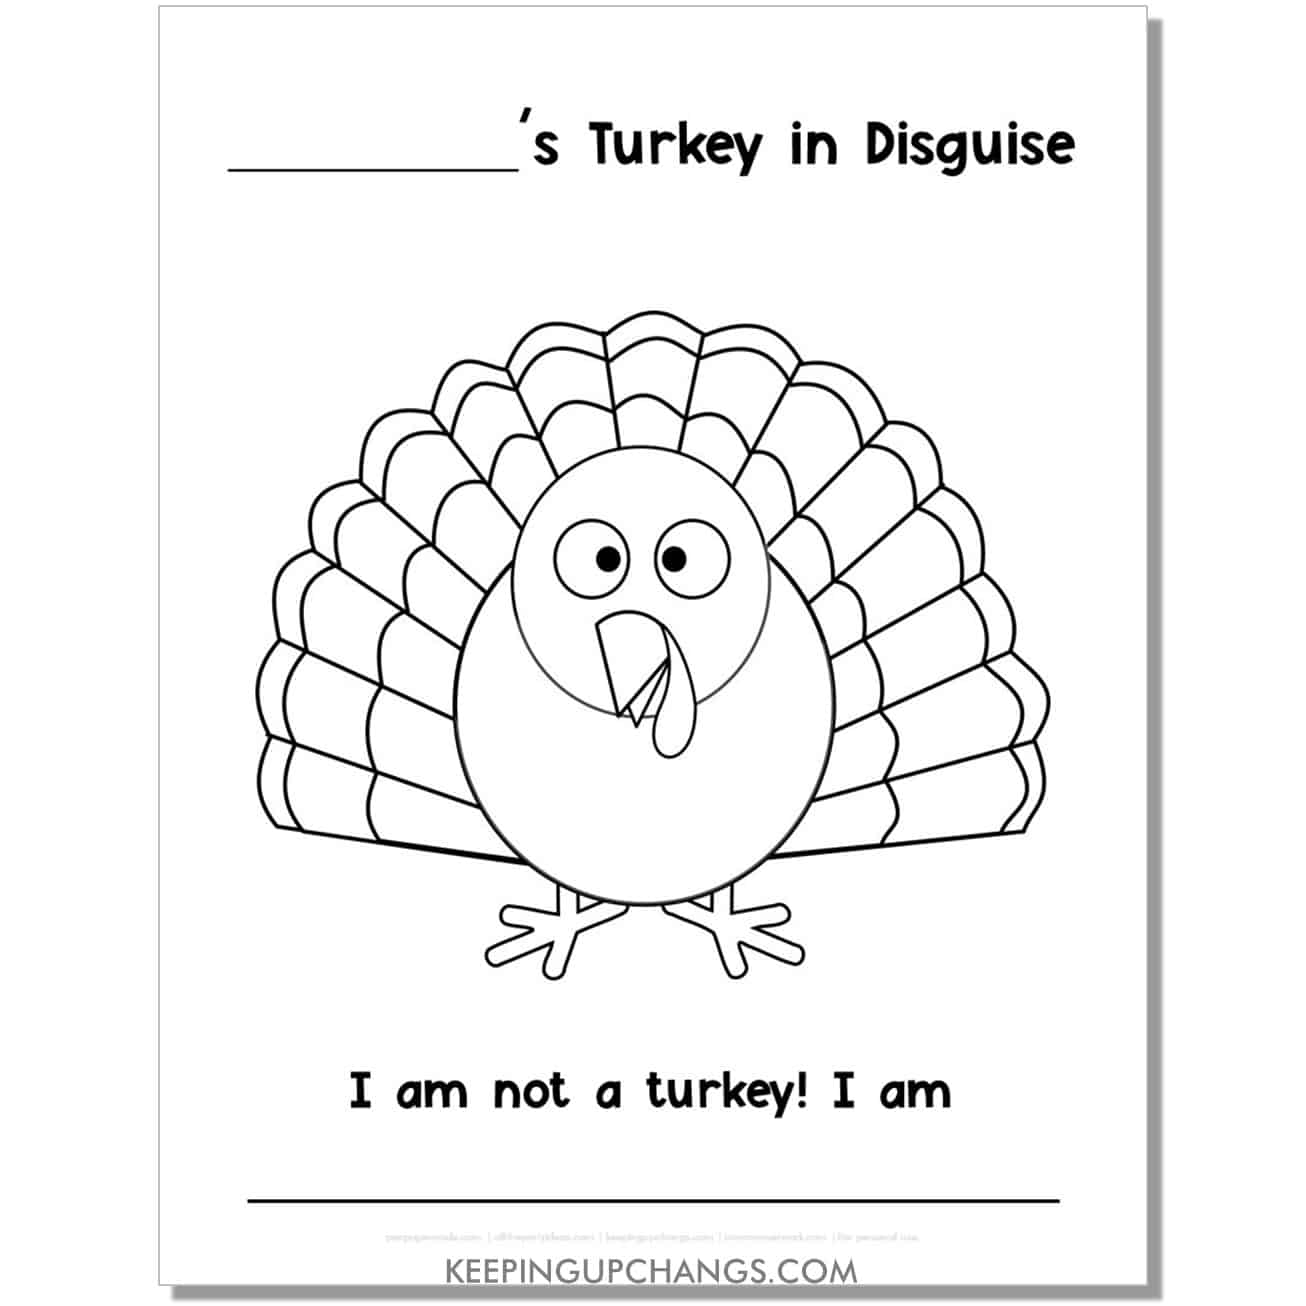 free turkey disguise project template with funny, silly turkey.